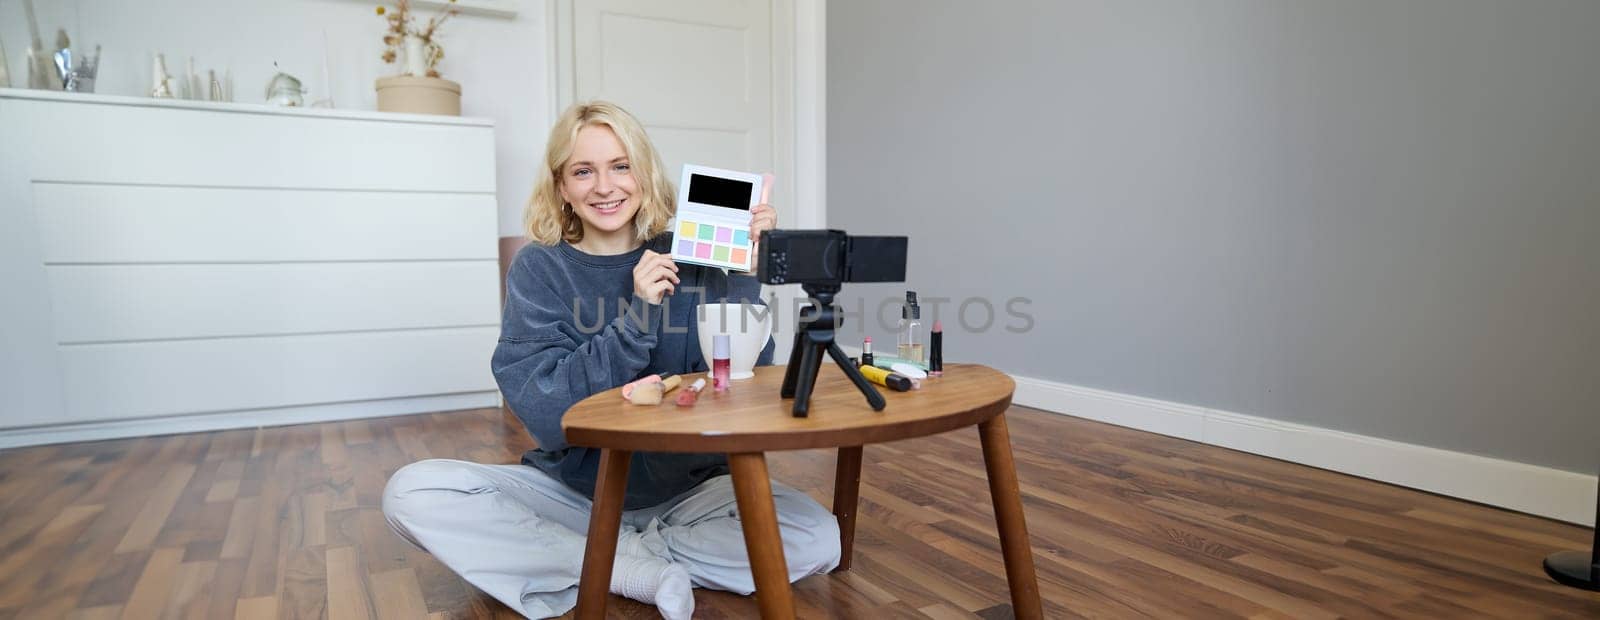 Portrait of beautiful smiling woman, recording video in her room, has camera on coffee table, reviewing makeup, doing lifestyle vlog for social media account, records a tutorial.